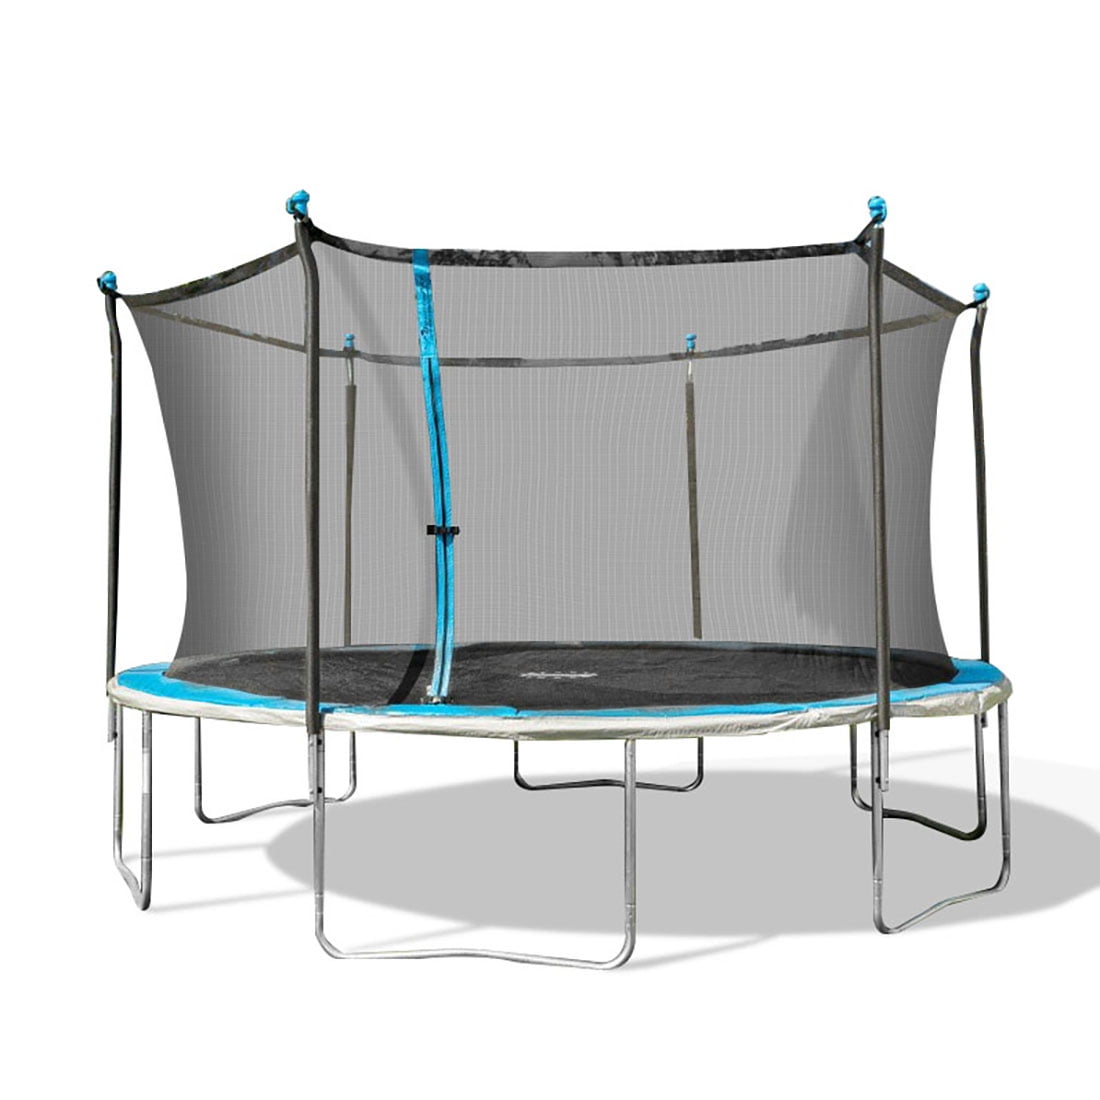 Details about   12FT Trampoline With Enclosure Kids Adult Safety Net Ladder Springs Jump Bounce 